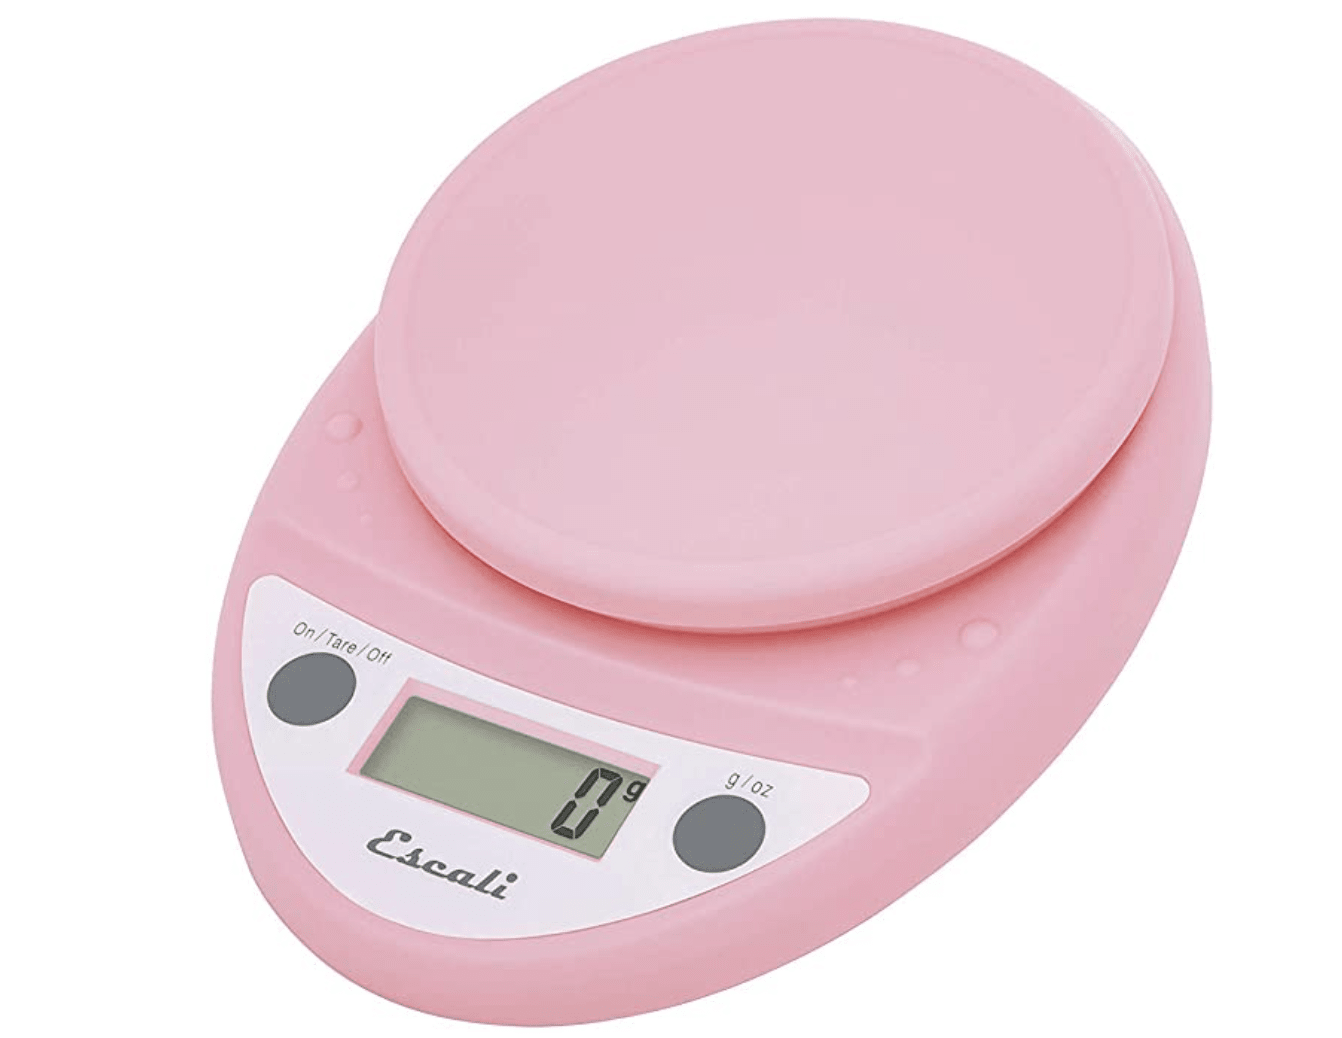 Food Scales: A Useful Tool to Help Lose Weight